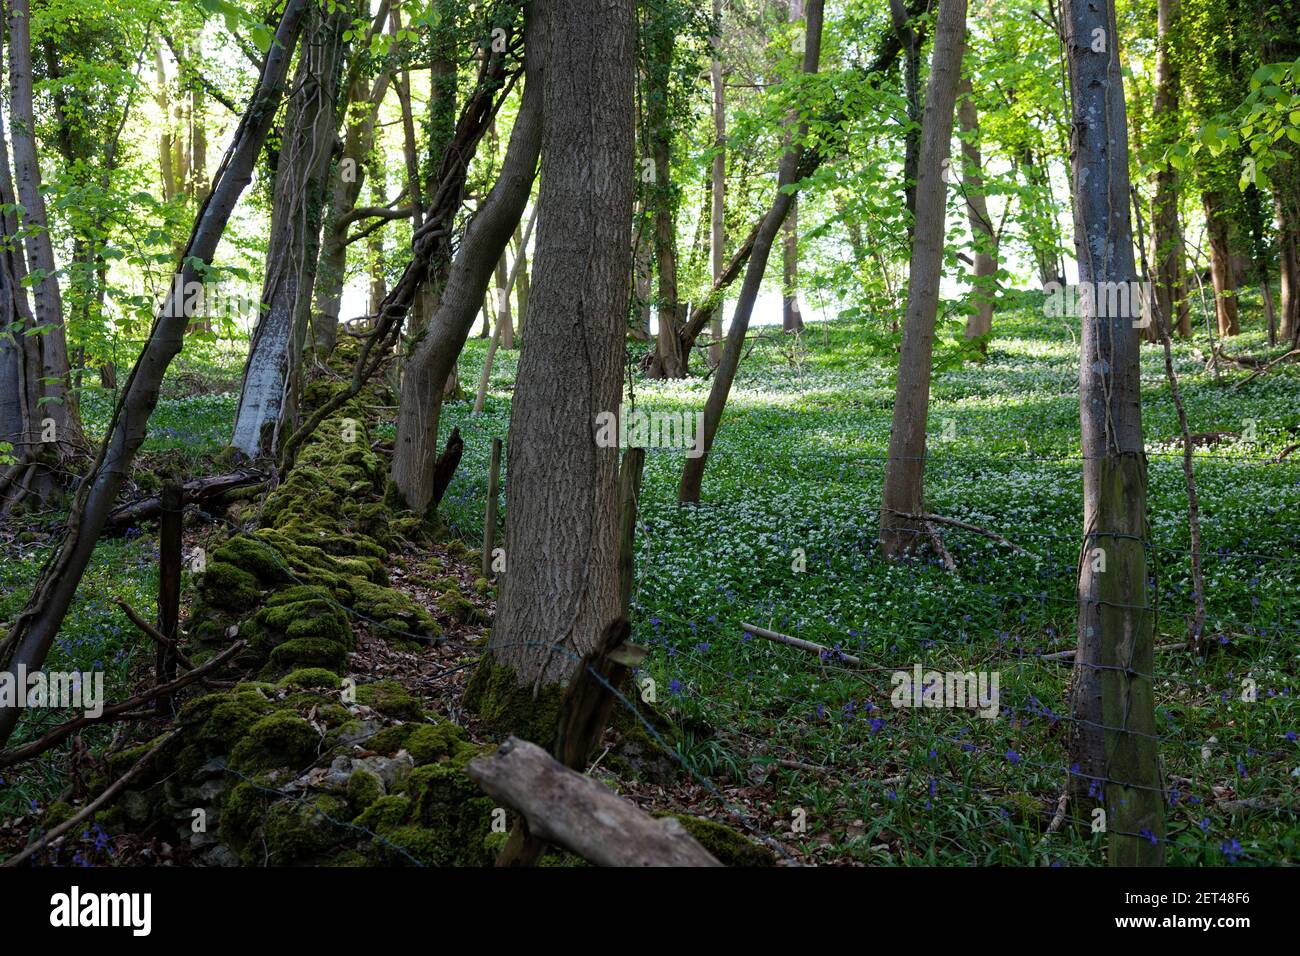 A mossy stone wall divides swathes of wild garlic and bluebells in woodland of the Cotswolds near Stroud, Gloucestershire, UK Stock Photo